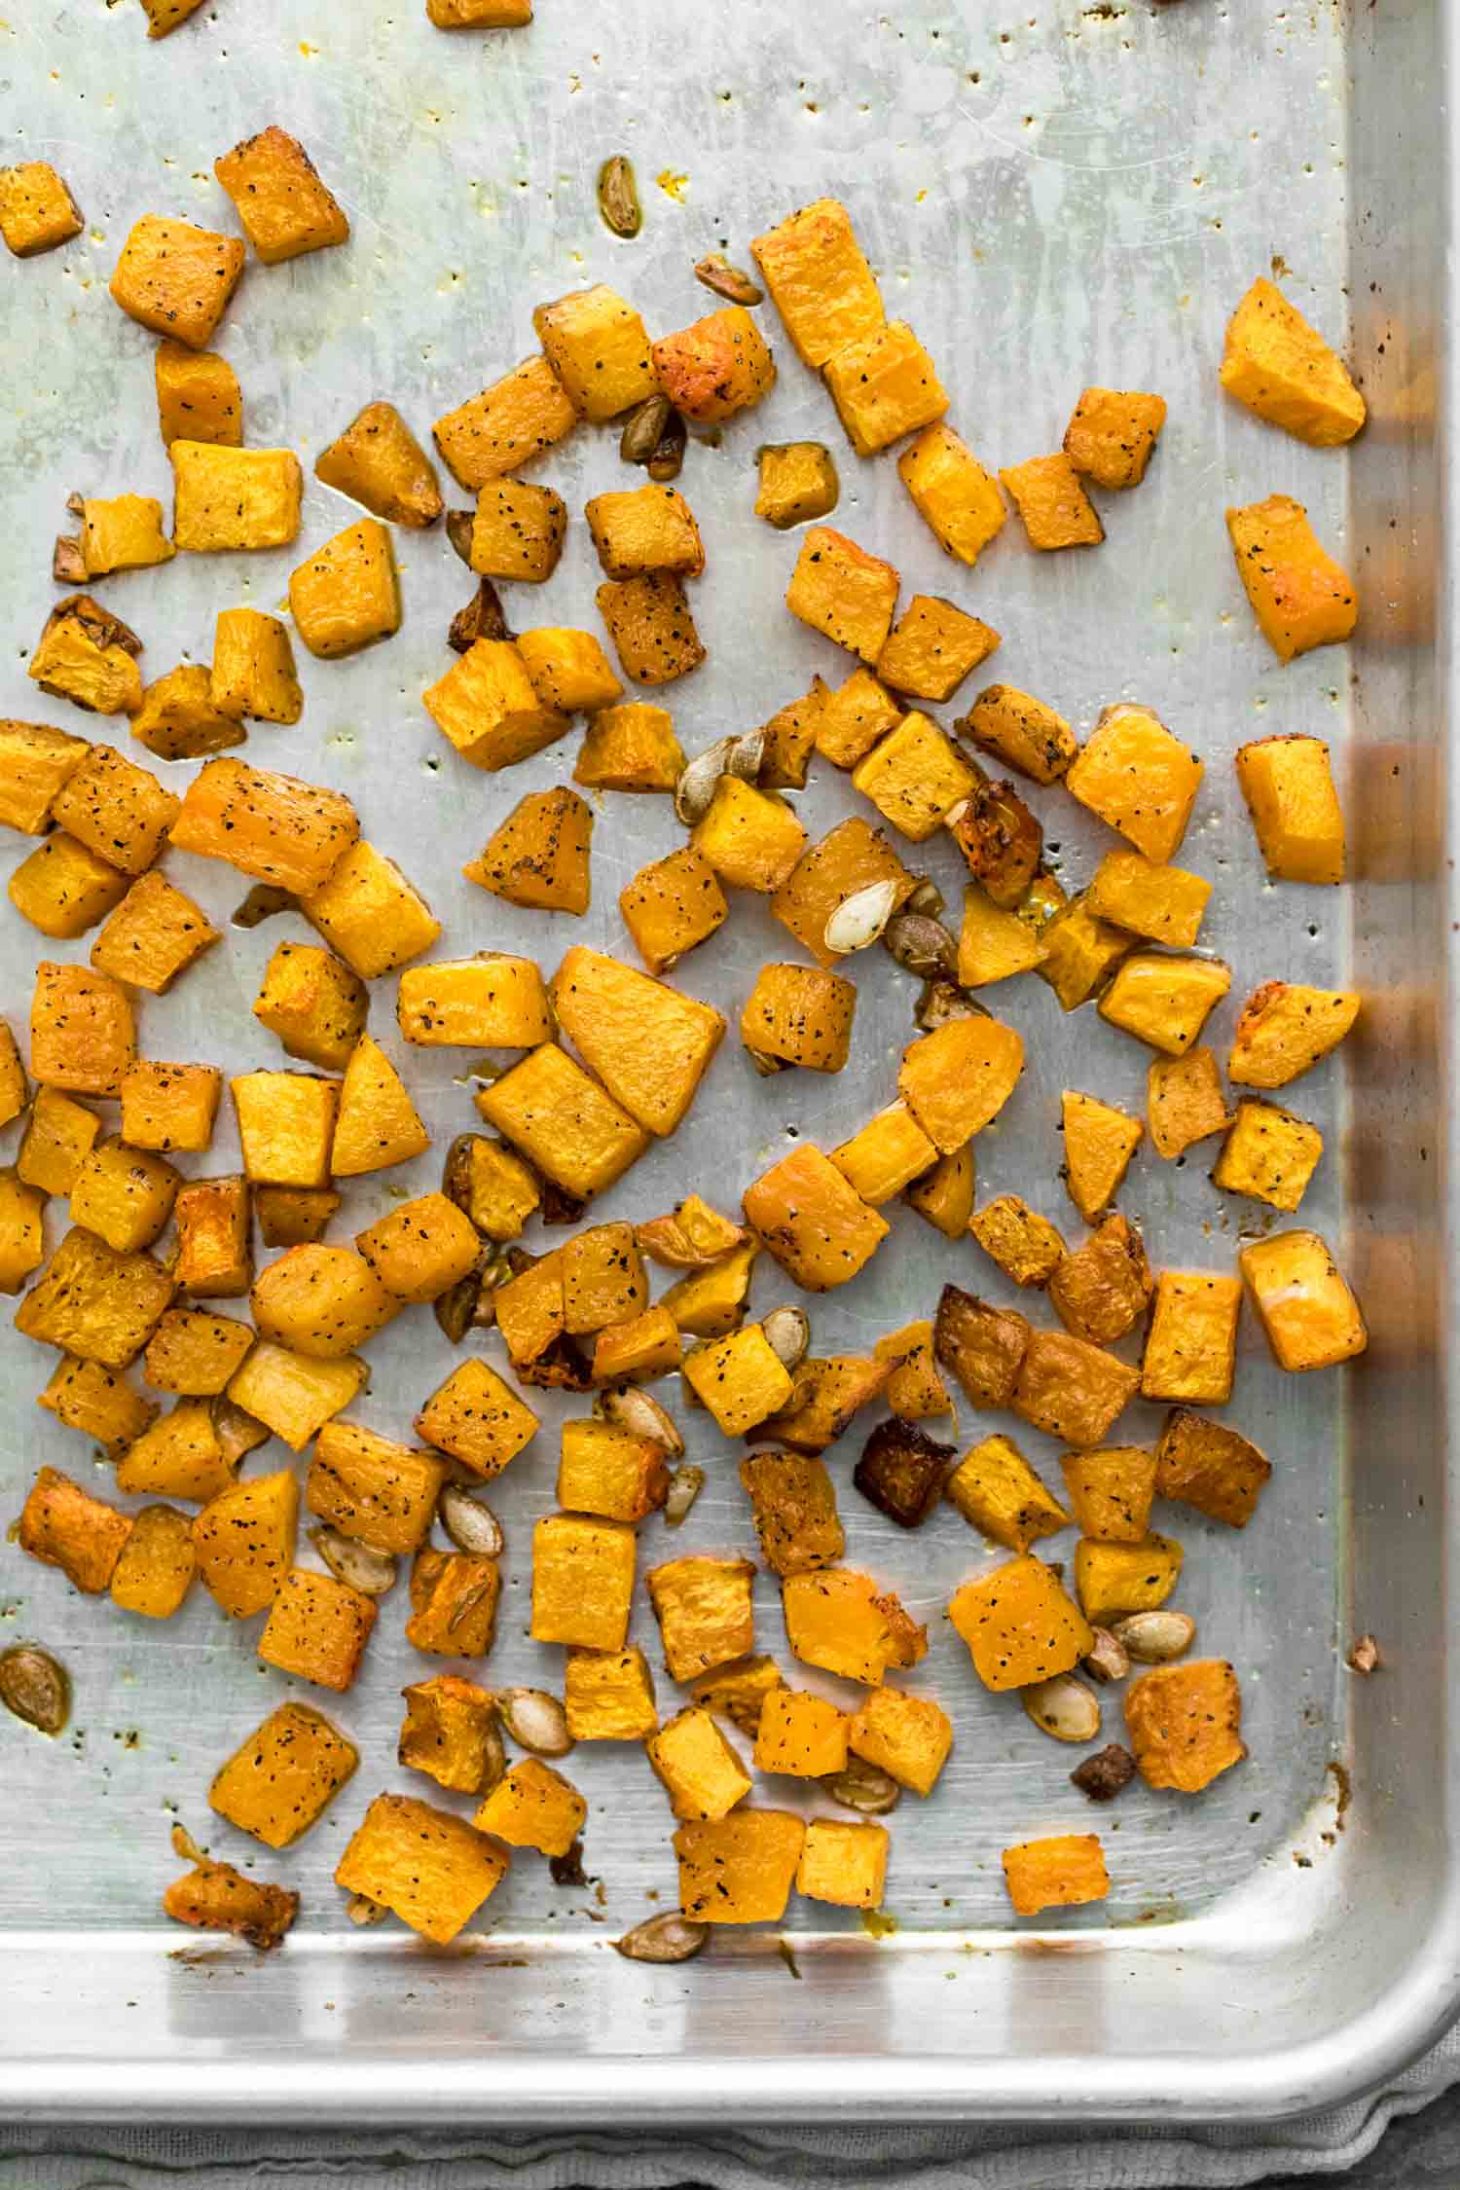 Roasted Butternut Squash | Cooking Component